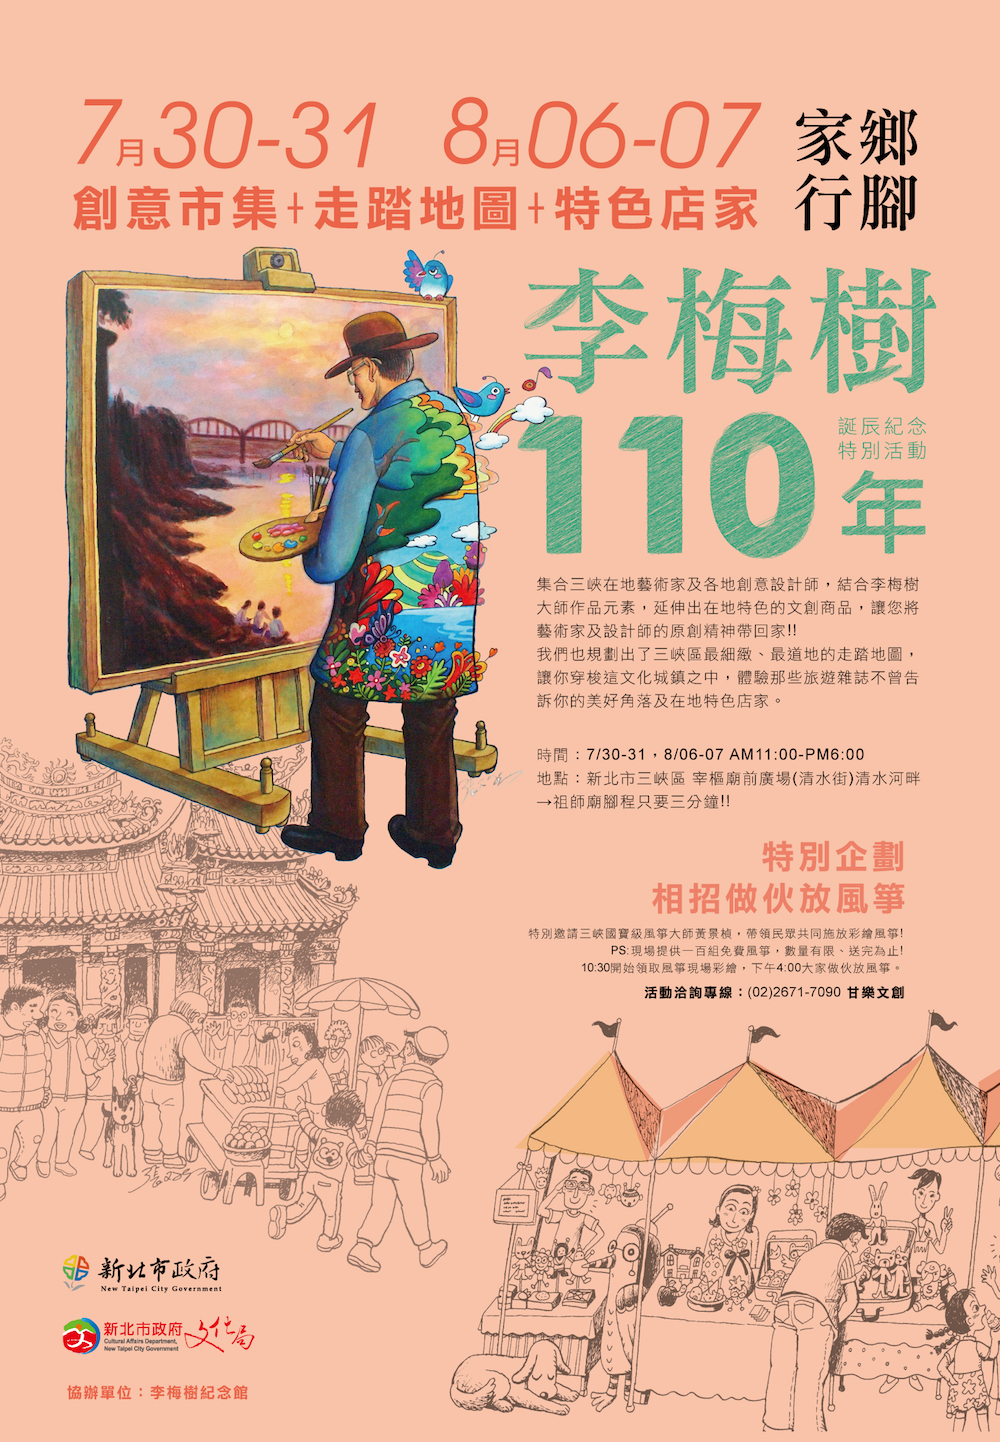 We have also planned a tour for visiting the actual sites where Master Mei-Shu Li painted his works. You can appreciate the paintings while observing in detail the differences and similarities between the scenes that once existed, comparing them with their actual appearances now.  | Taipei Cultural experience | CAN Culture